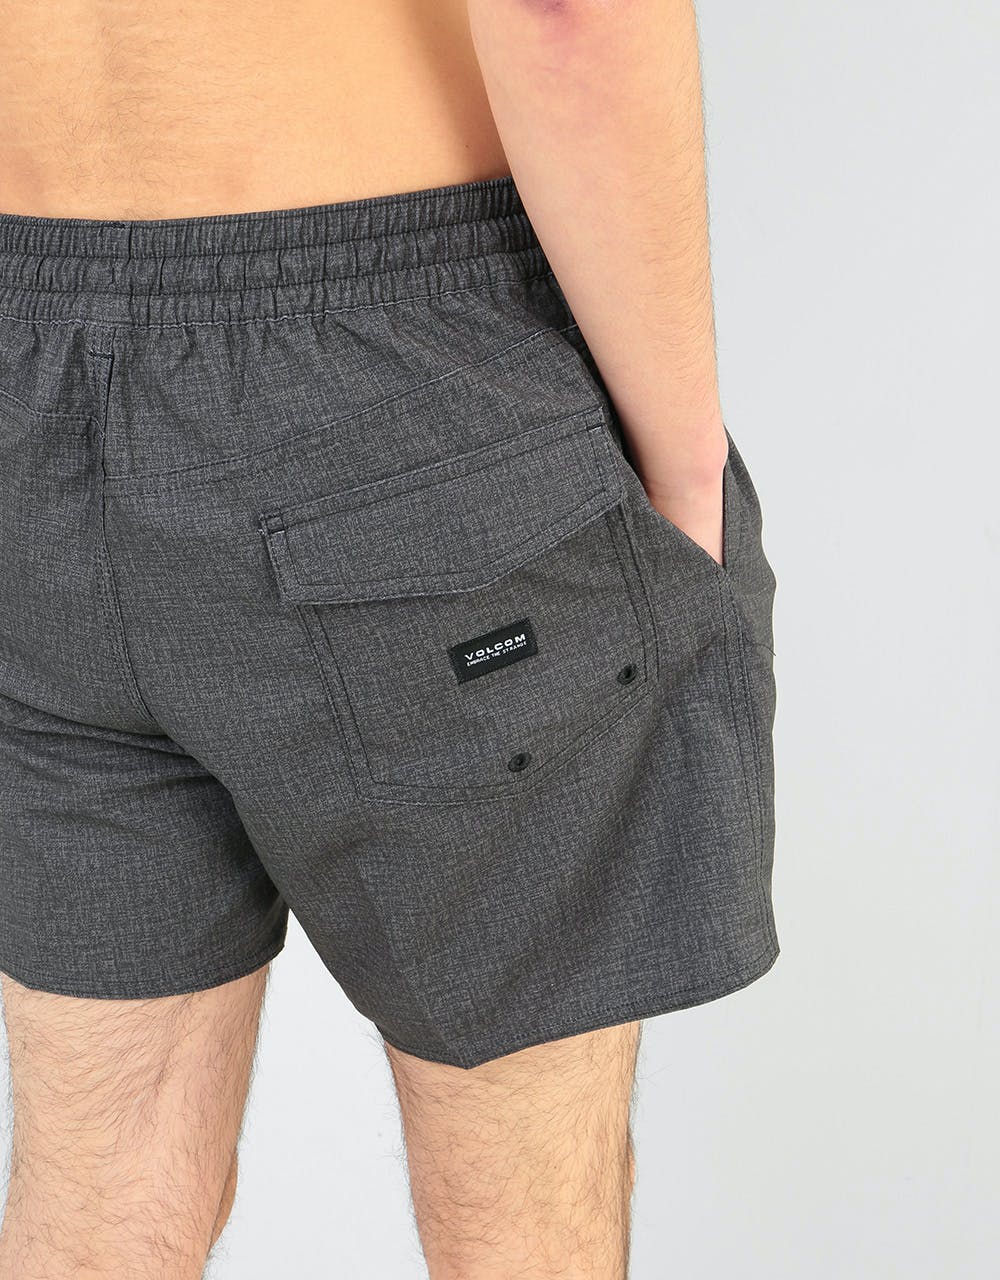 Volcom Lido 16" Volley Short - Charcoal Heather